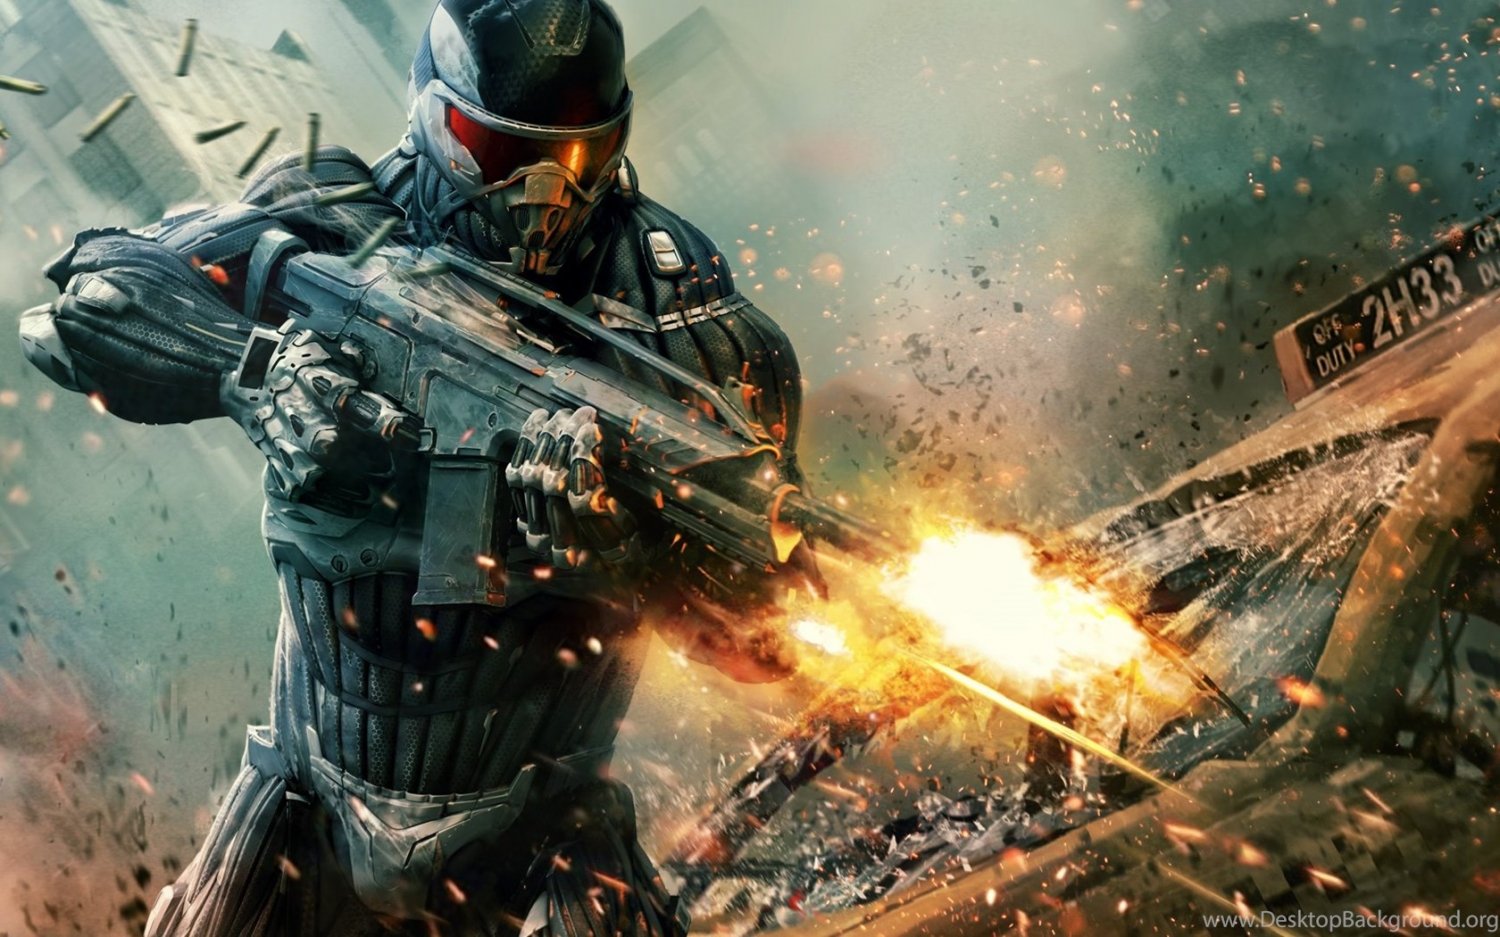 71834_35_new-crysis-game-may-not-be-remaster-but-an-online-multiplayer_full.jpg